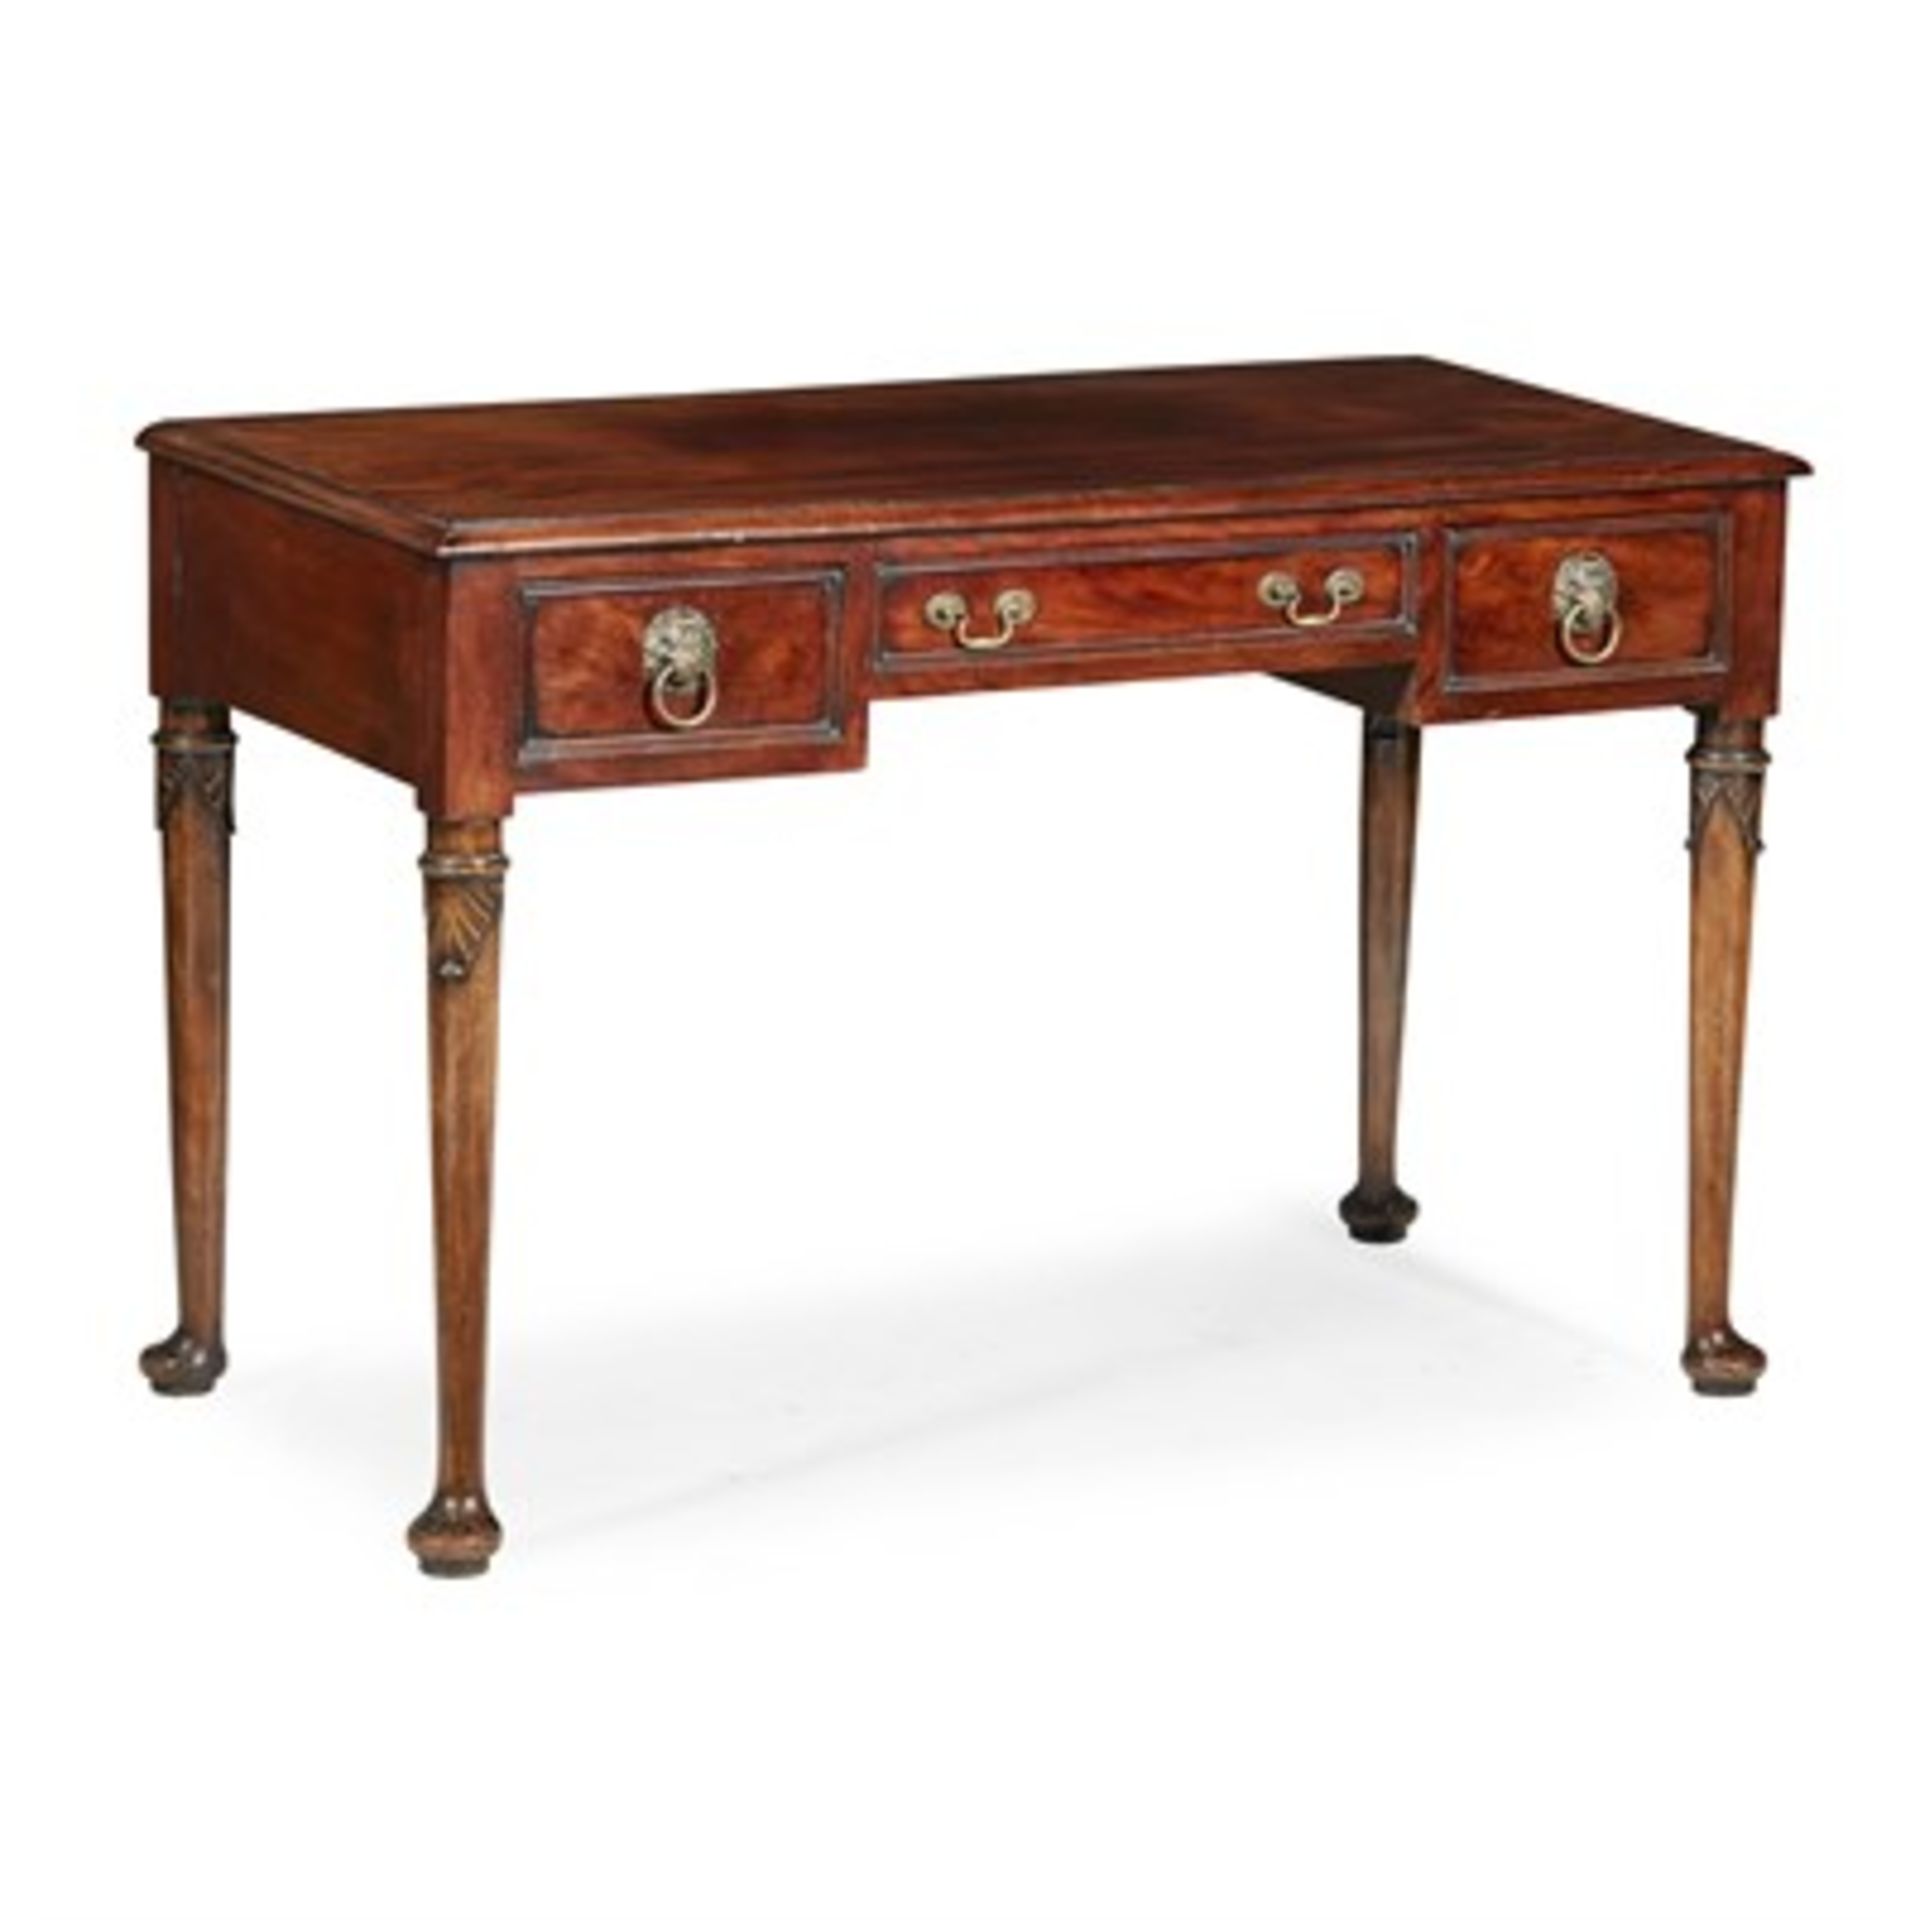 PAIR OF GEORGE II MAHOGANY WRITING TABLES MID 18TH CENTURY the rectangular tops with moulded edges - Image 2 of 3